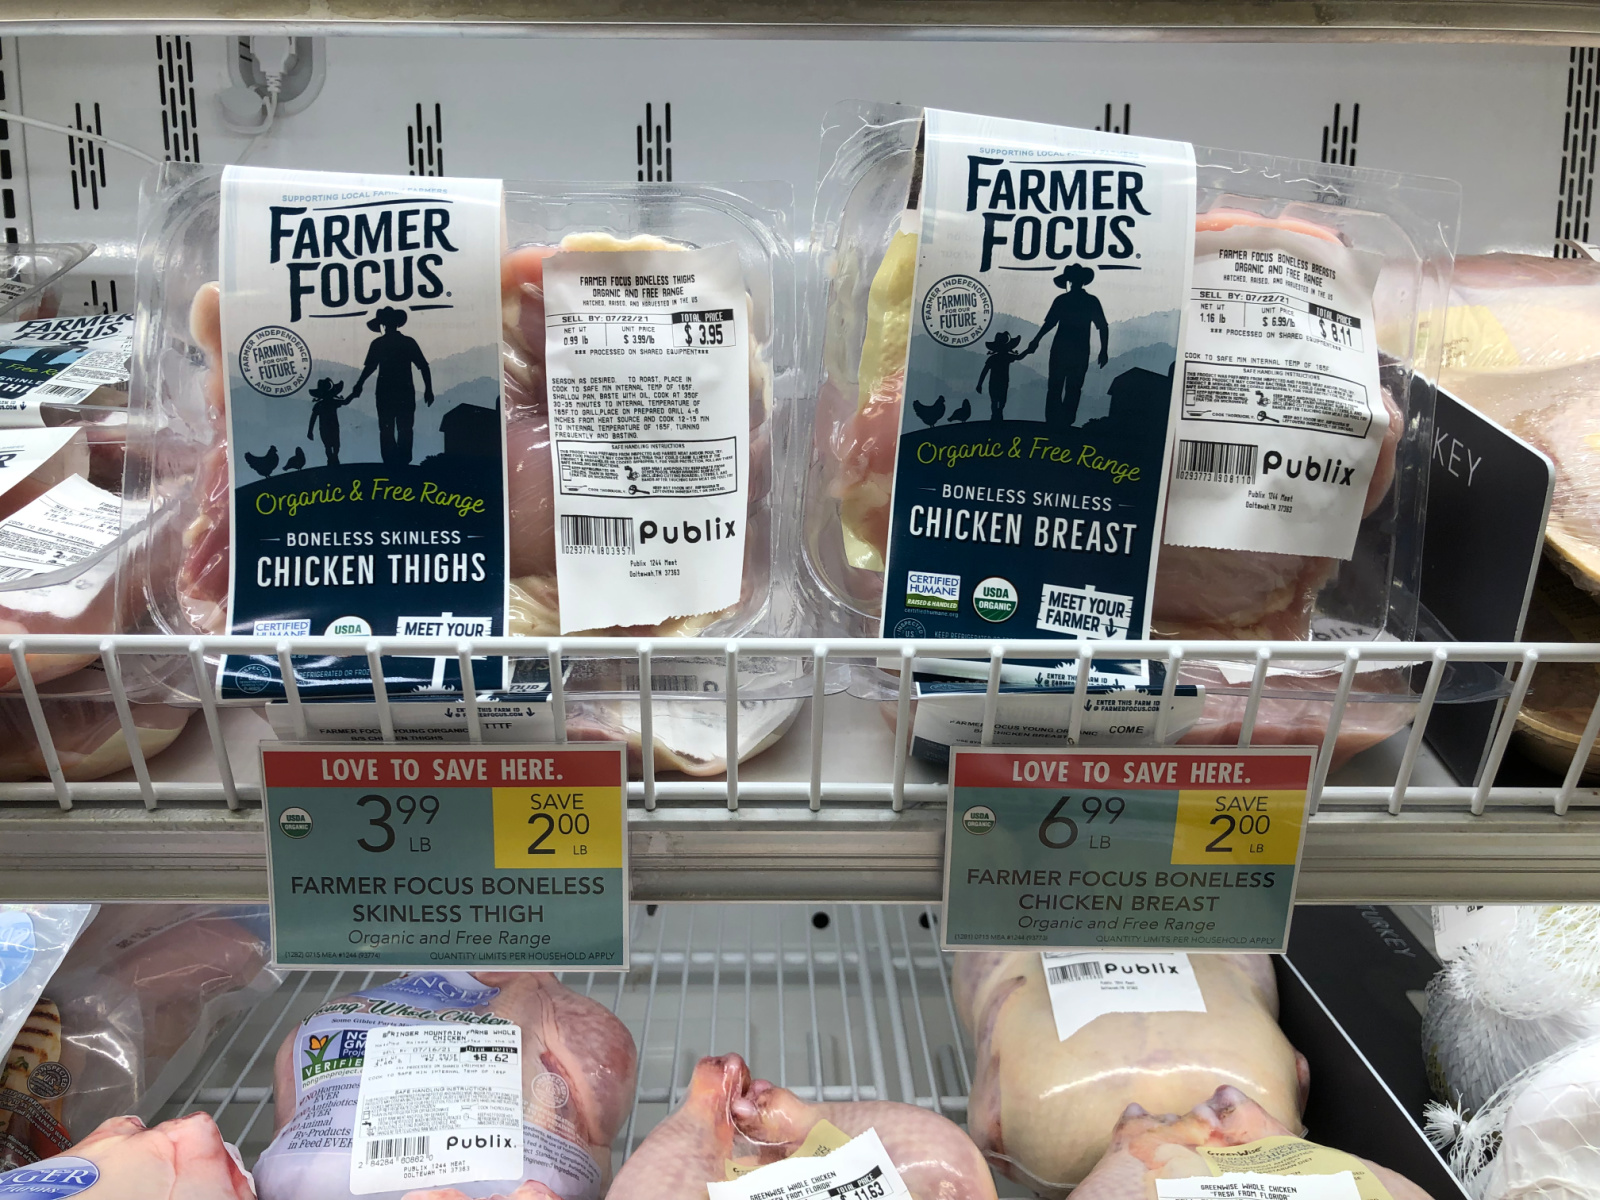 Save $2 On Delicious Farmer Focus Chicken This Week At Publix on I Heart Publix 1